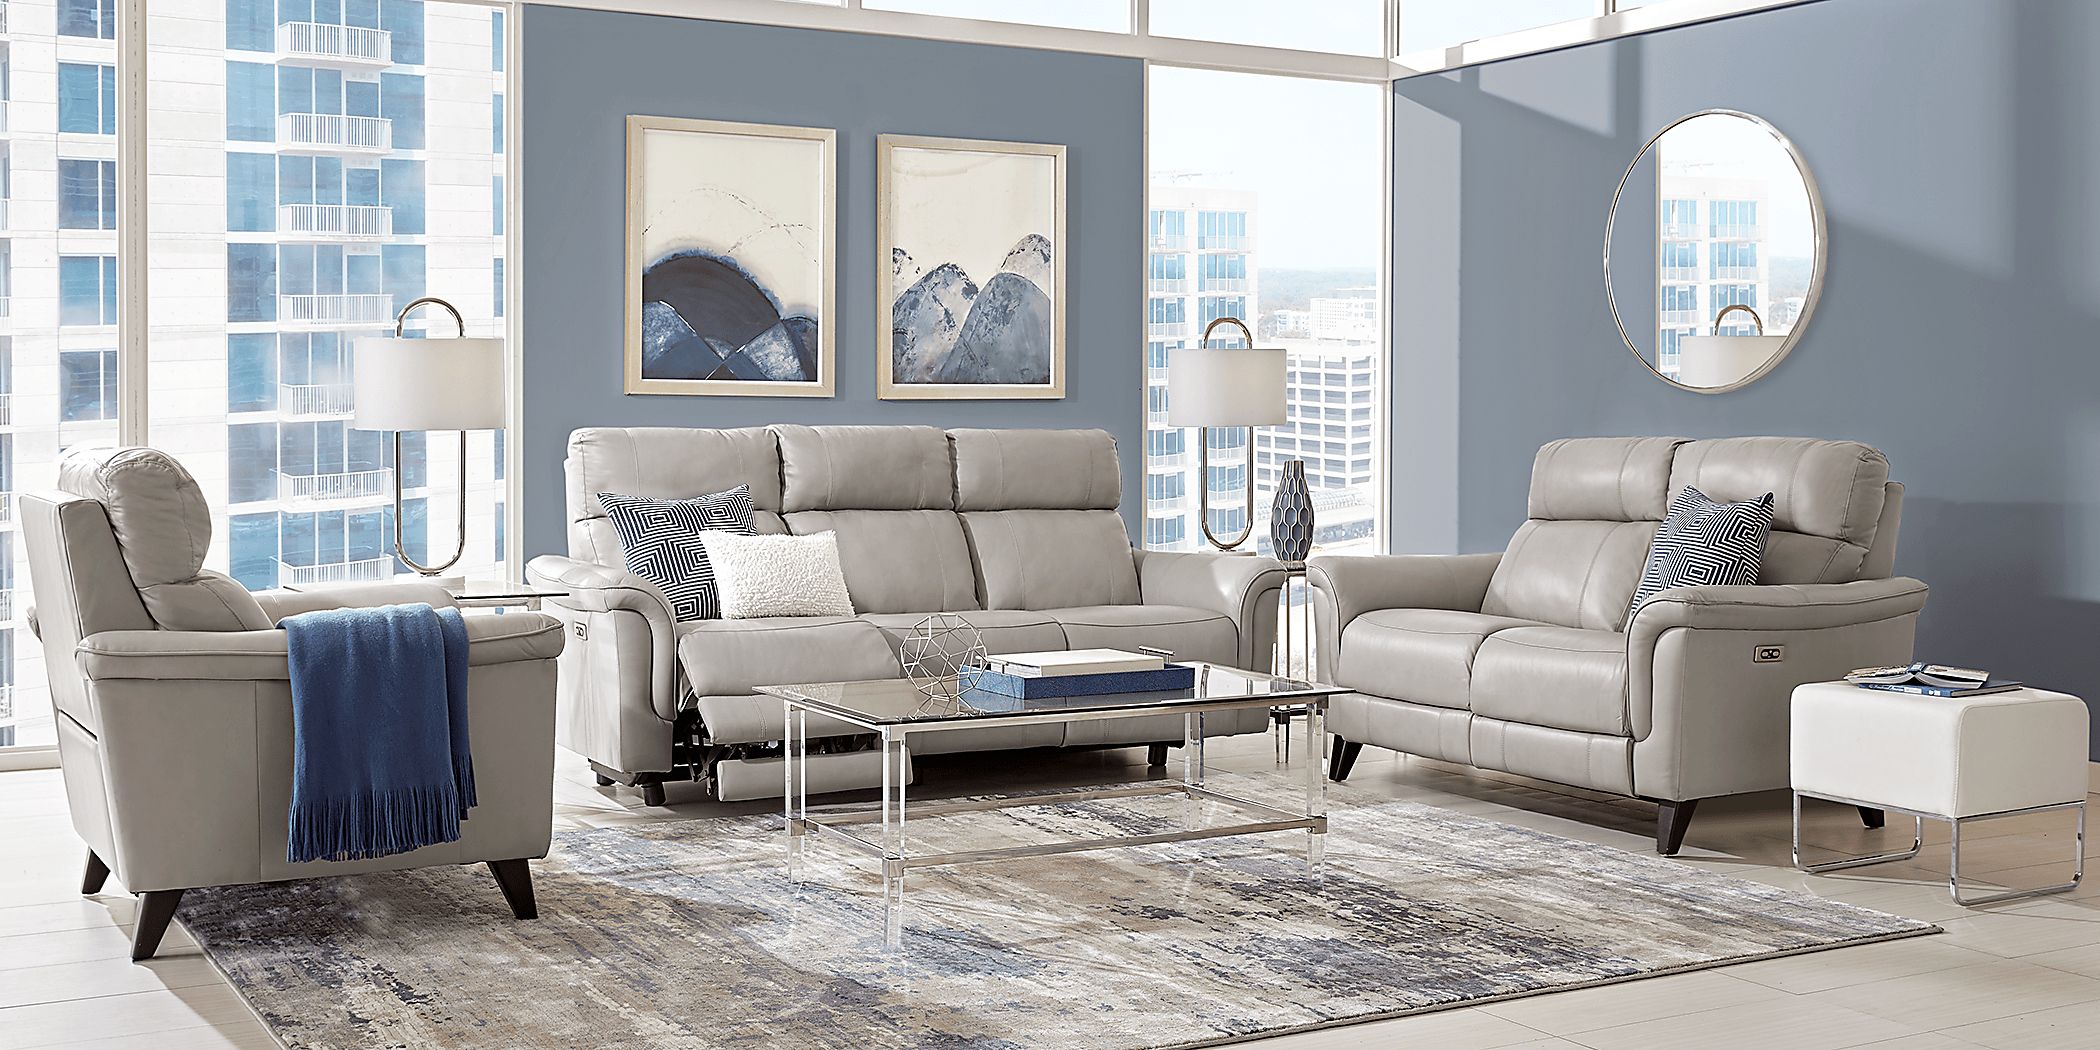 Avezzano Stone 5 Pc Leather Living Room with Dual Power Reclining Sofa